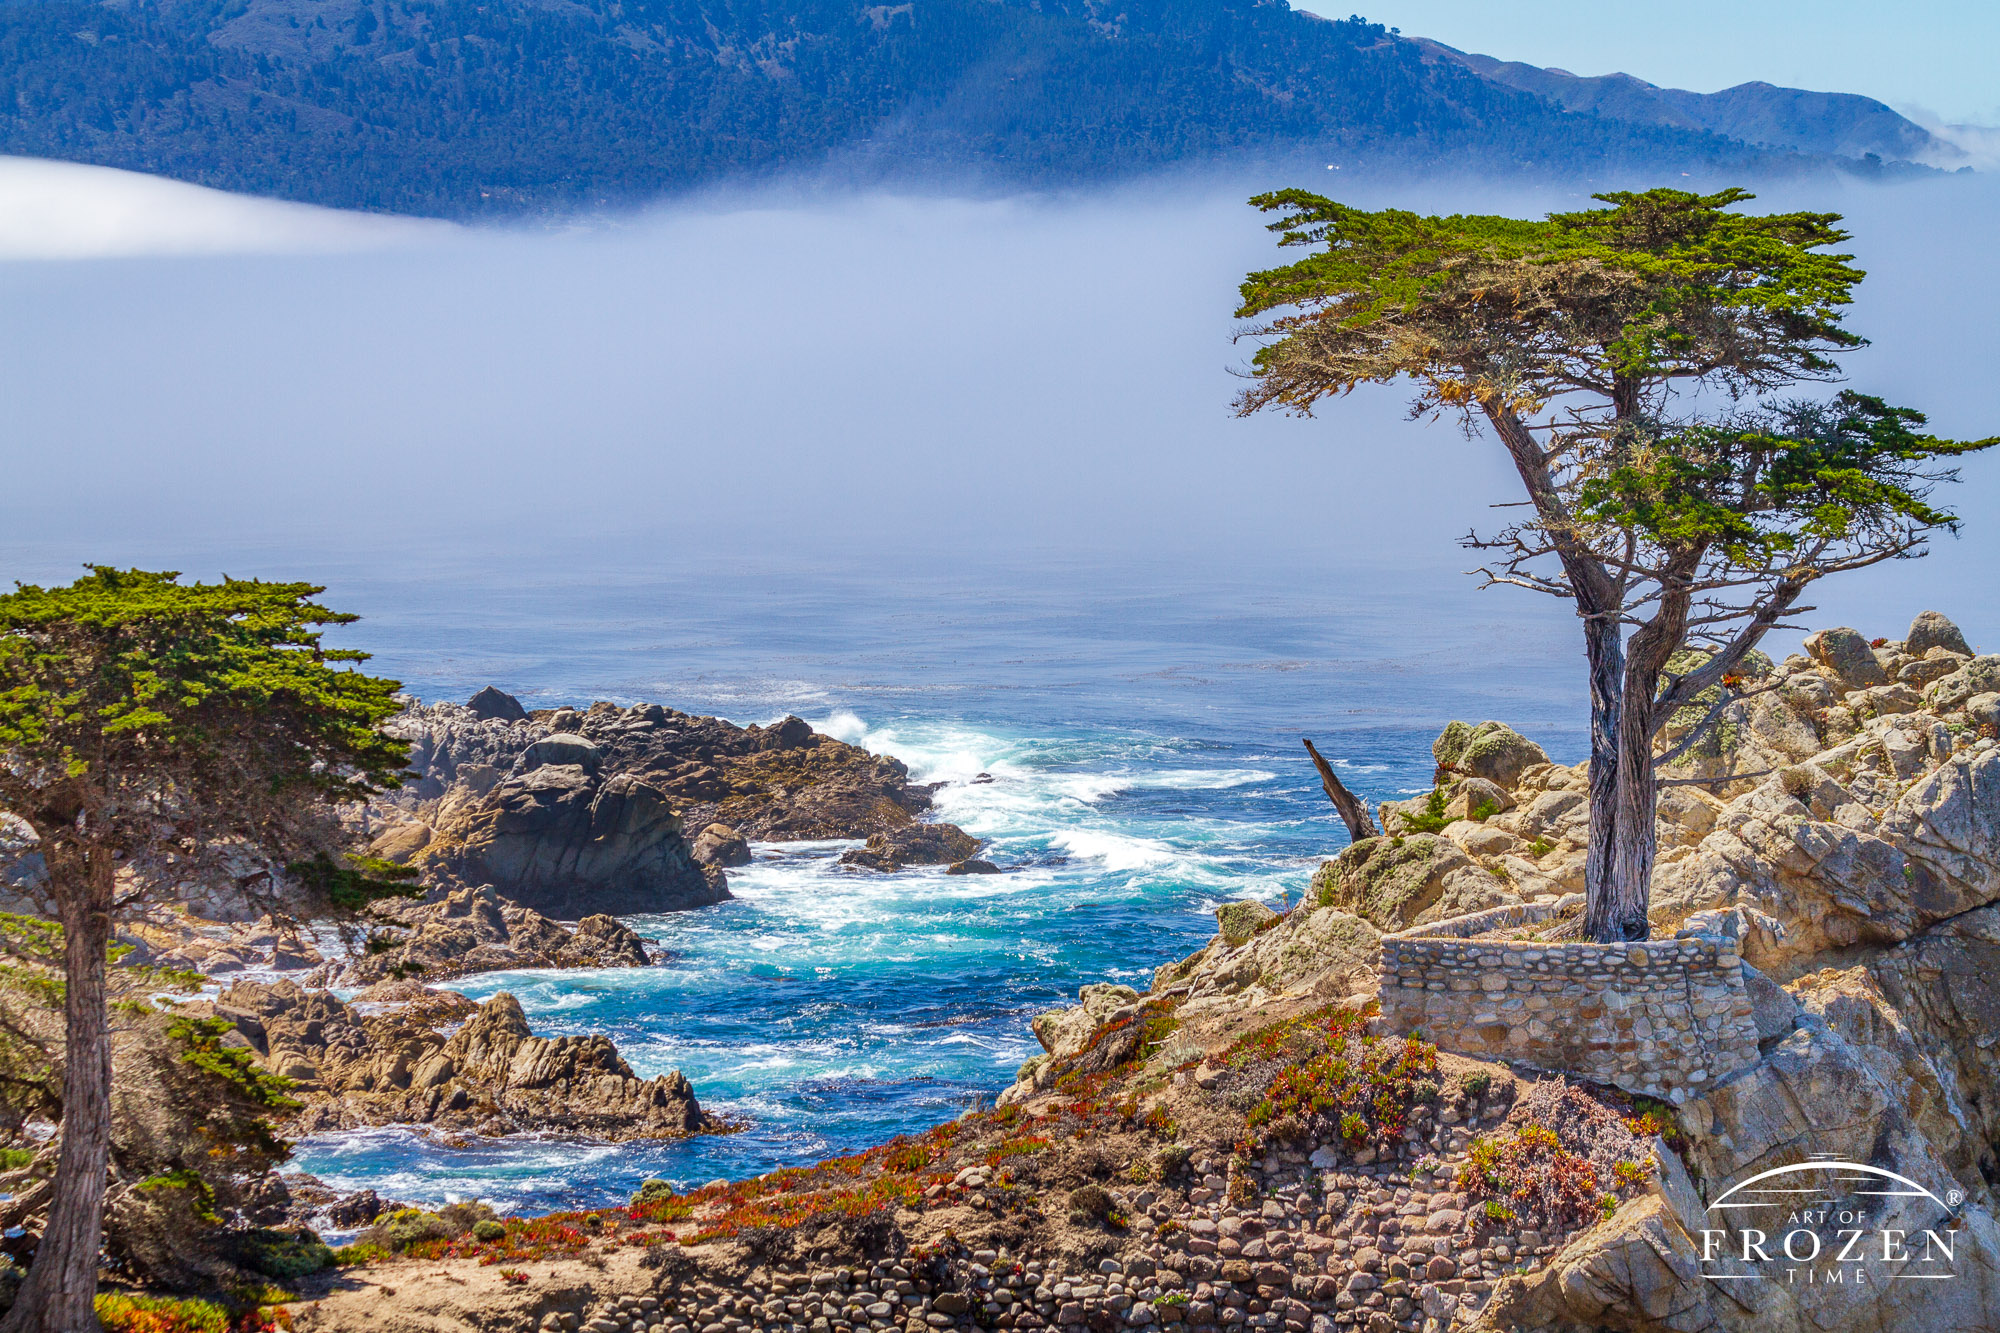 An intimate view of the Lone Cypress Tree along the California coast where the vivid blue waters churn under the sea fog making its way ashore.